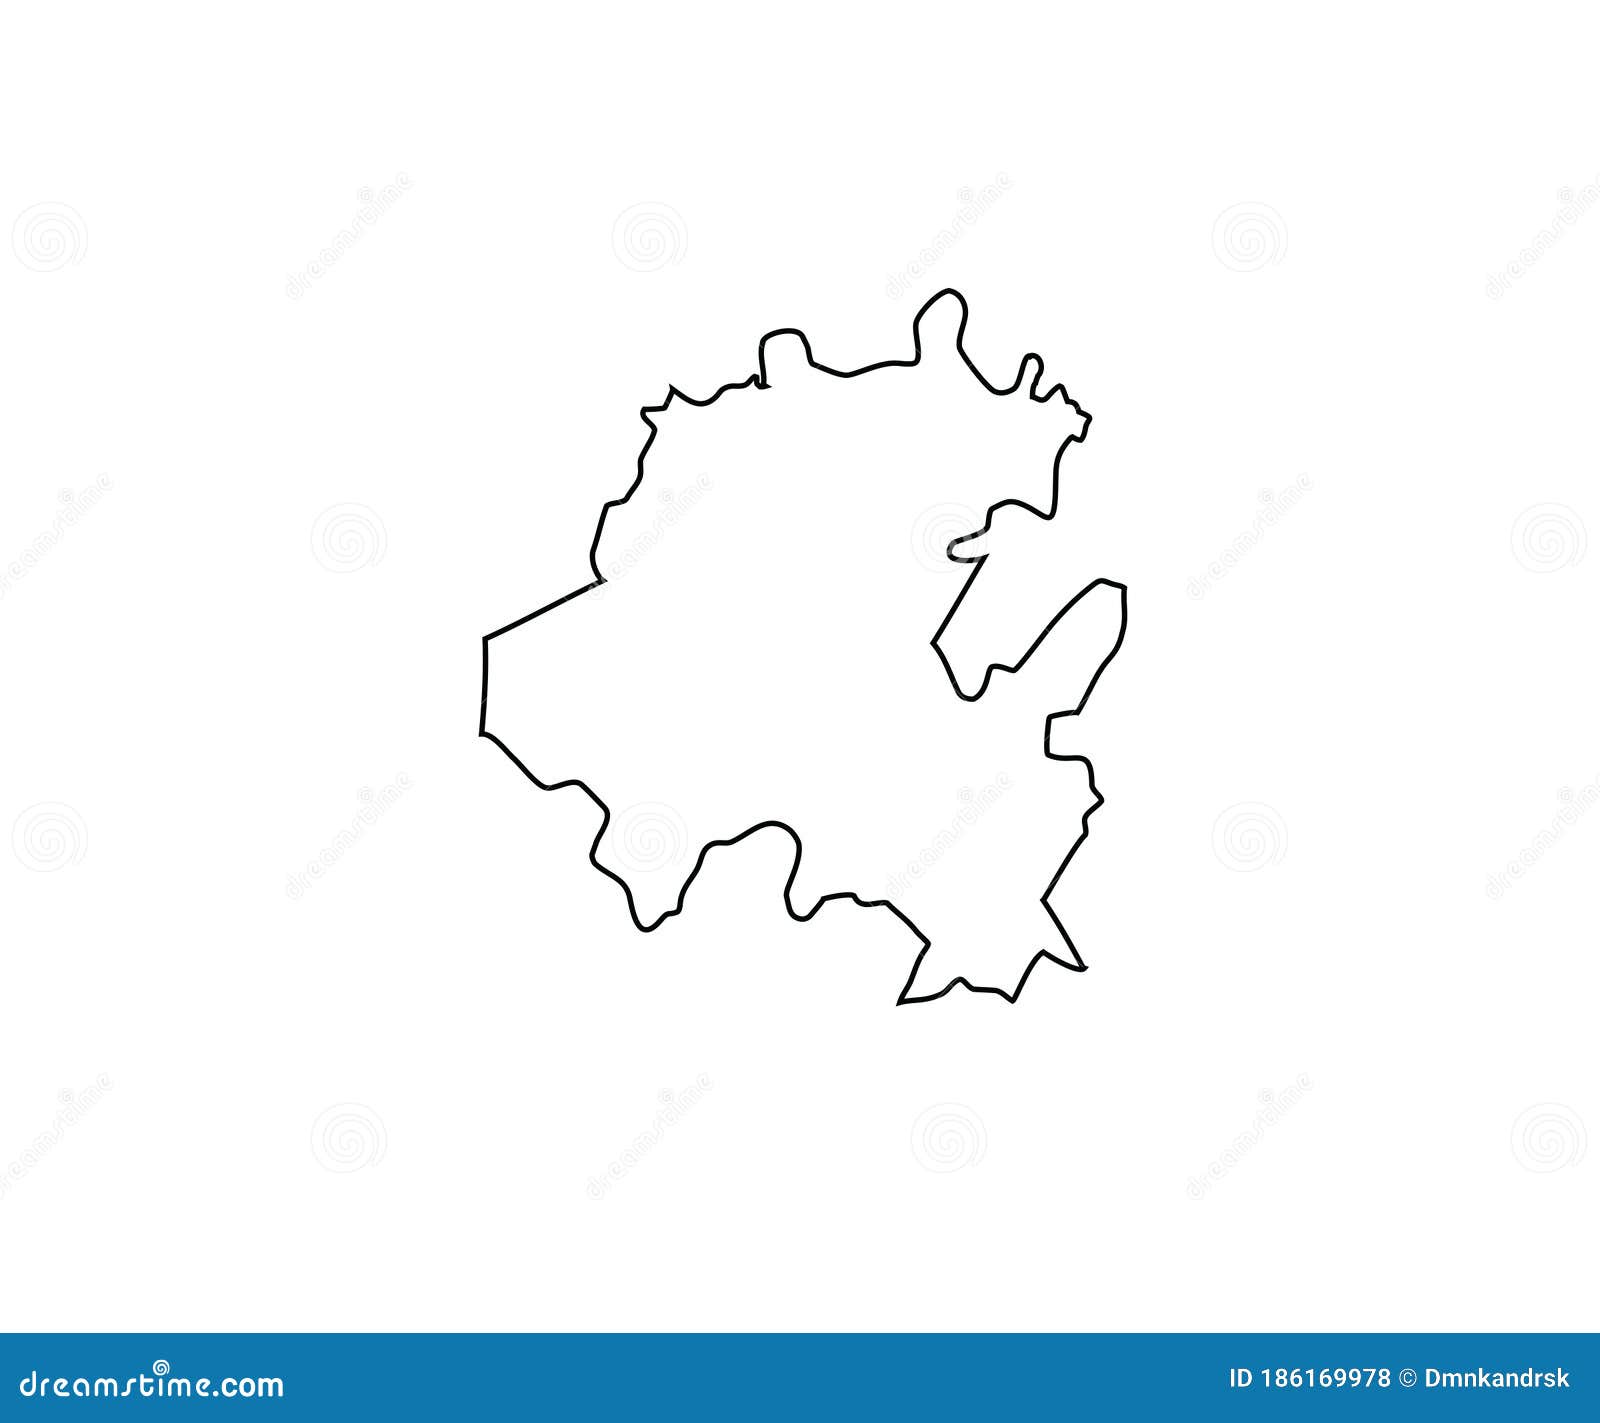 hidalgo outline map mexico state region country 